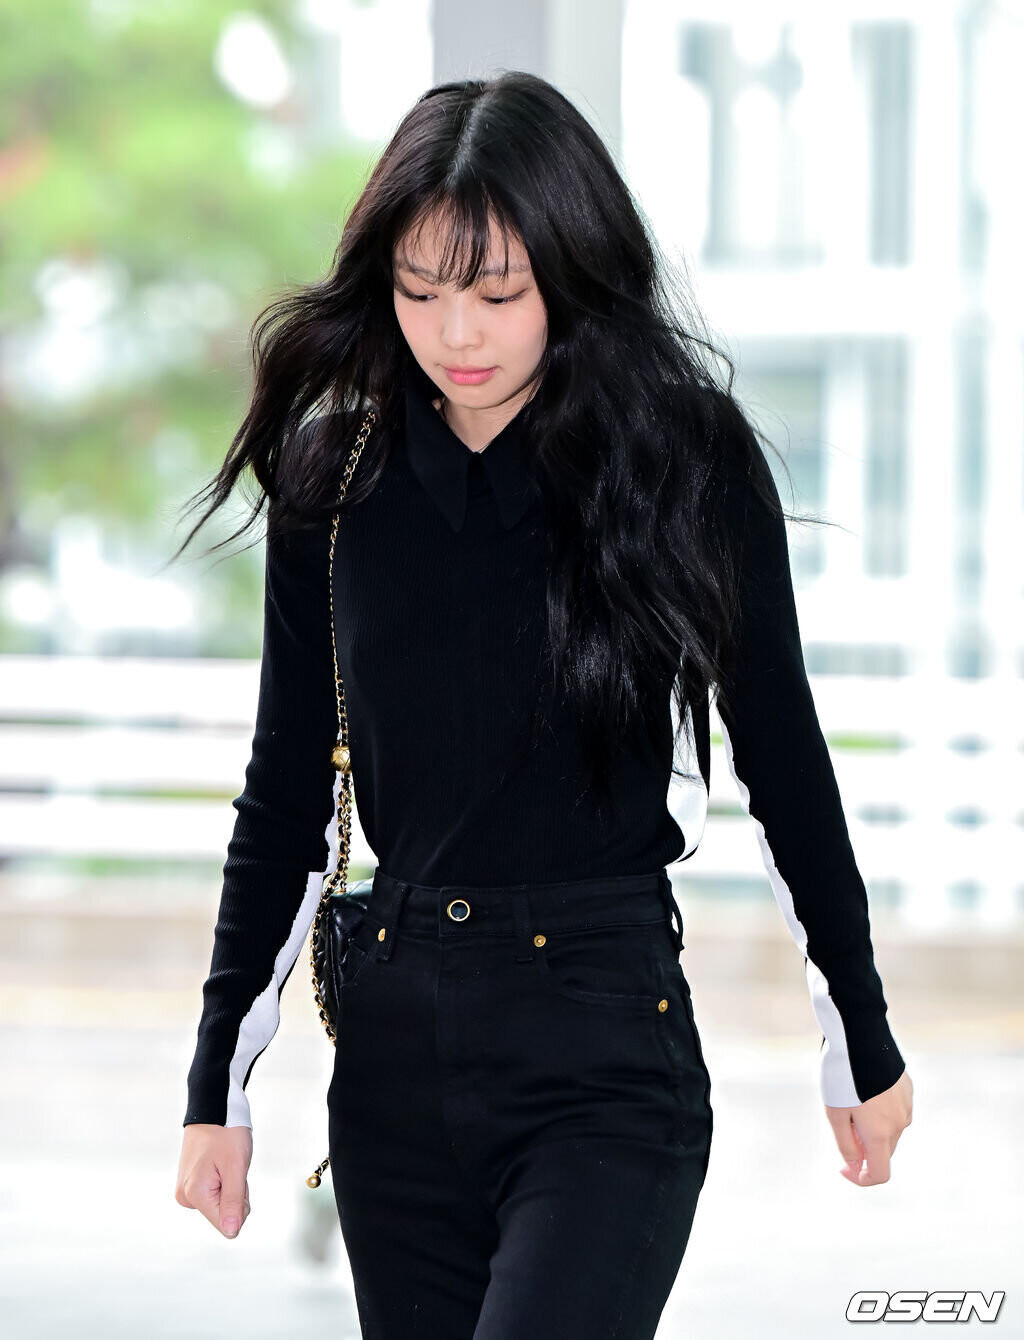 X 上的ᴱᴬᴿᵀᴴ ᴶᴱᴺᴺᴵᴱ：「Chanel released official photos of Jennie appearance in  ICN airport go to Paris Jennie showed off her fashionista side. The white  long trench coat worn by Jenni